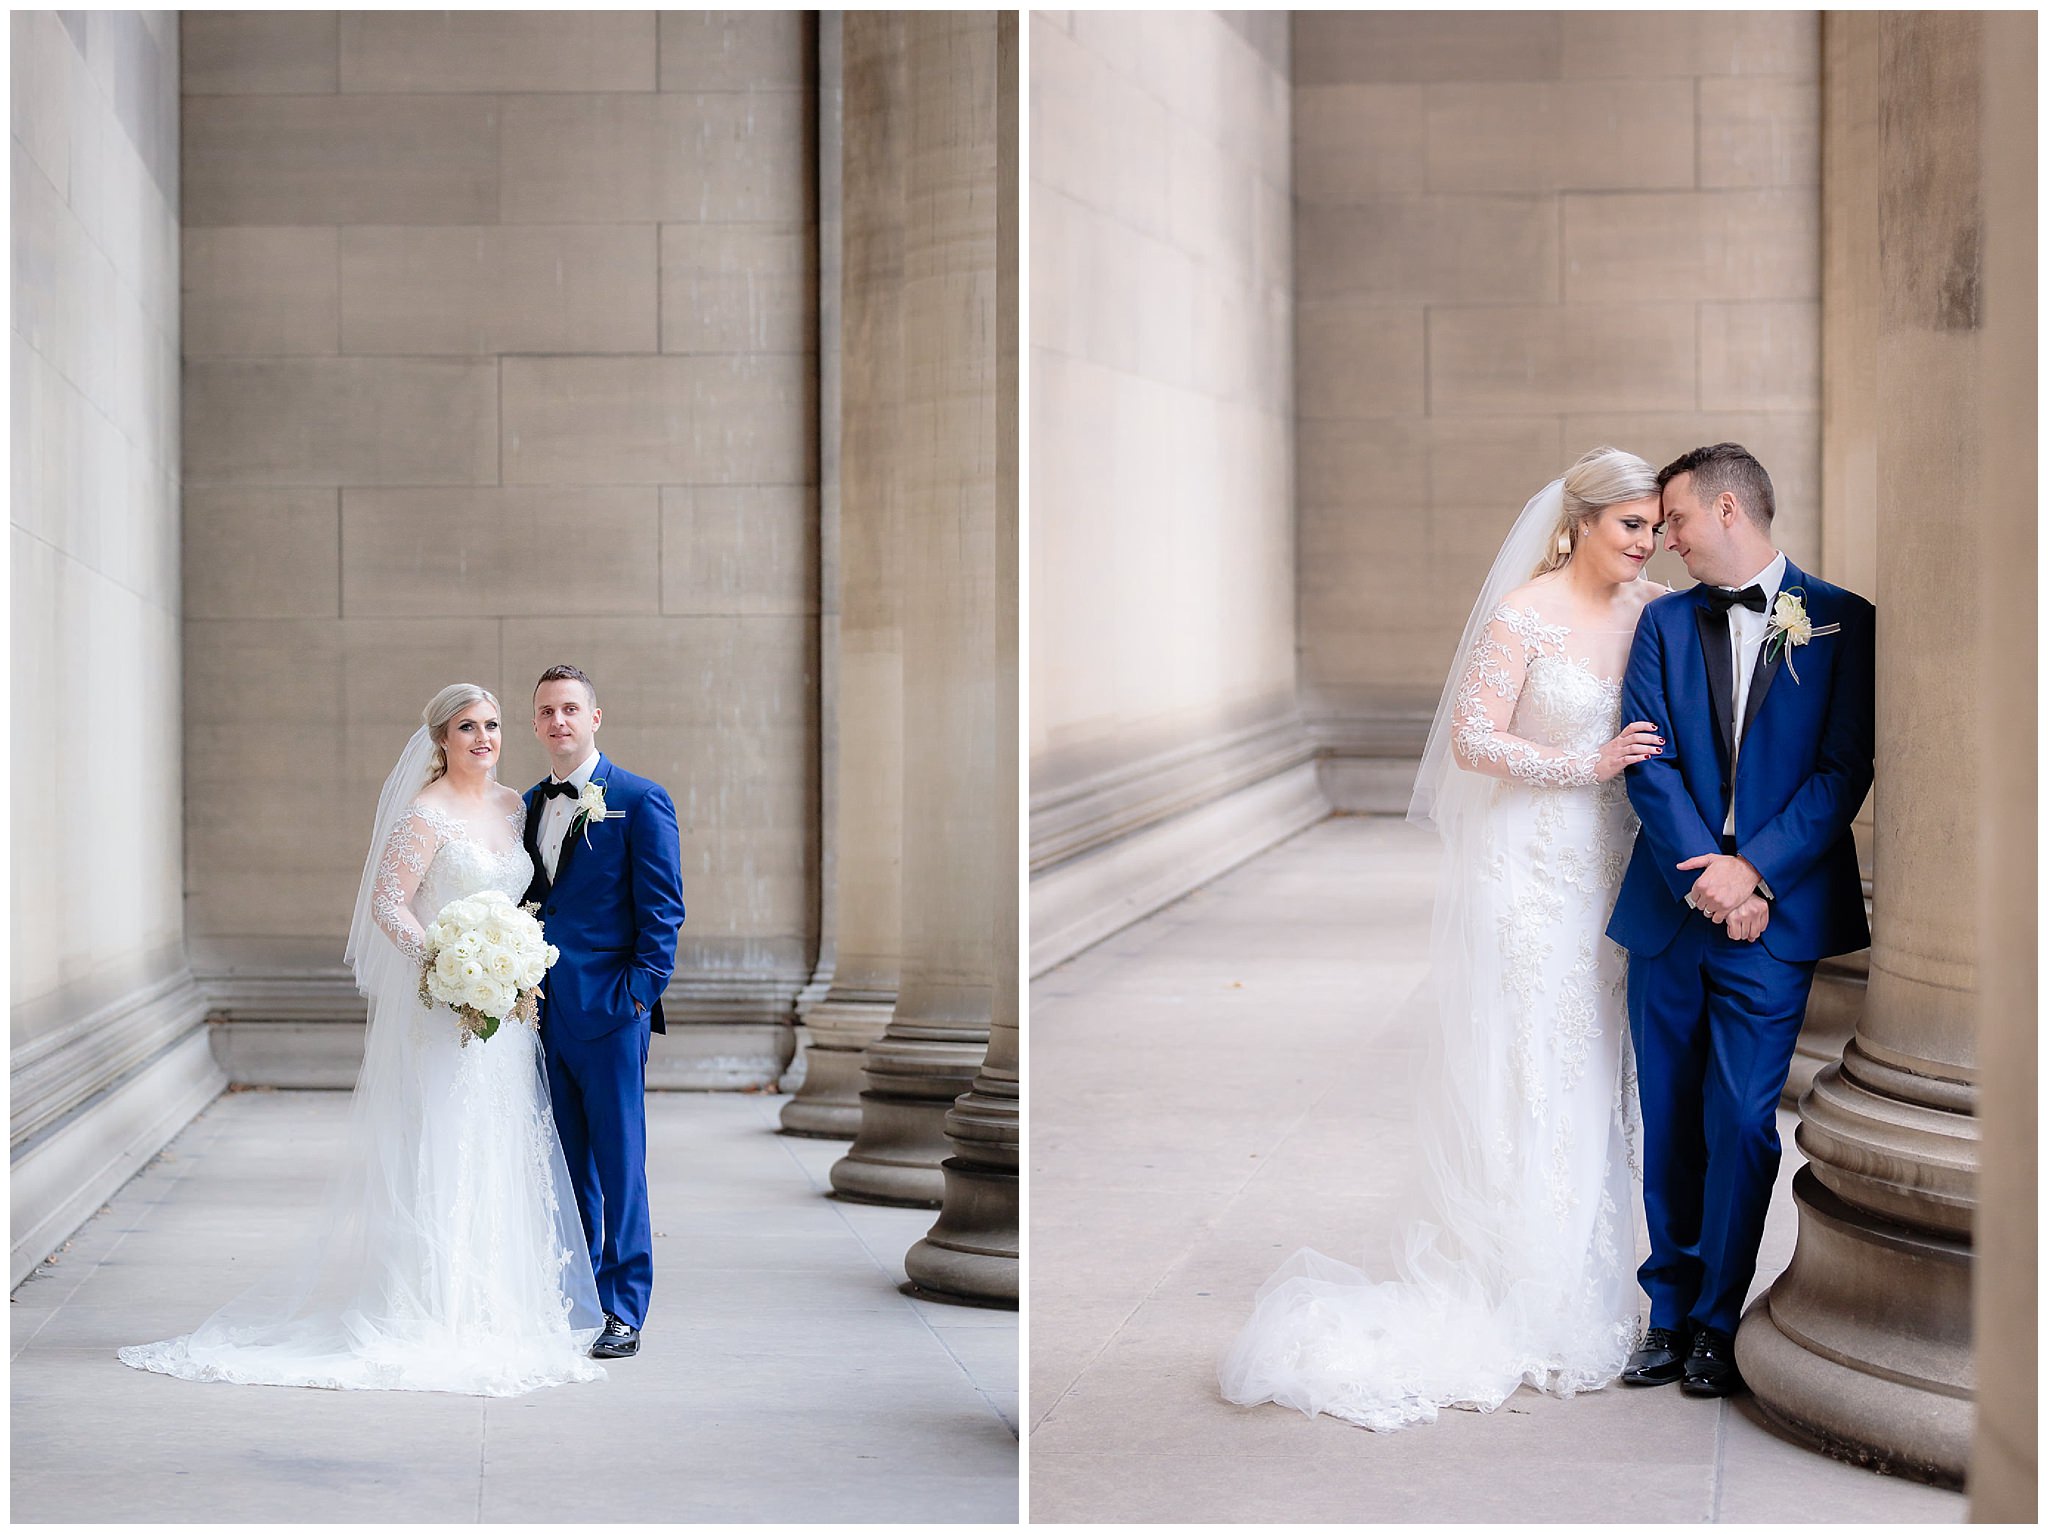 Bride & groom portraits a the Mellon Institute in Pittsburgh, PA